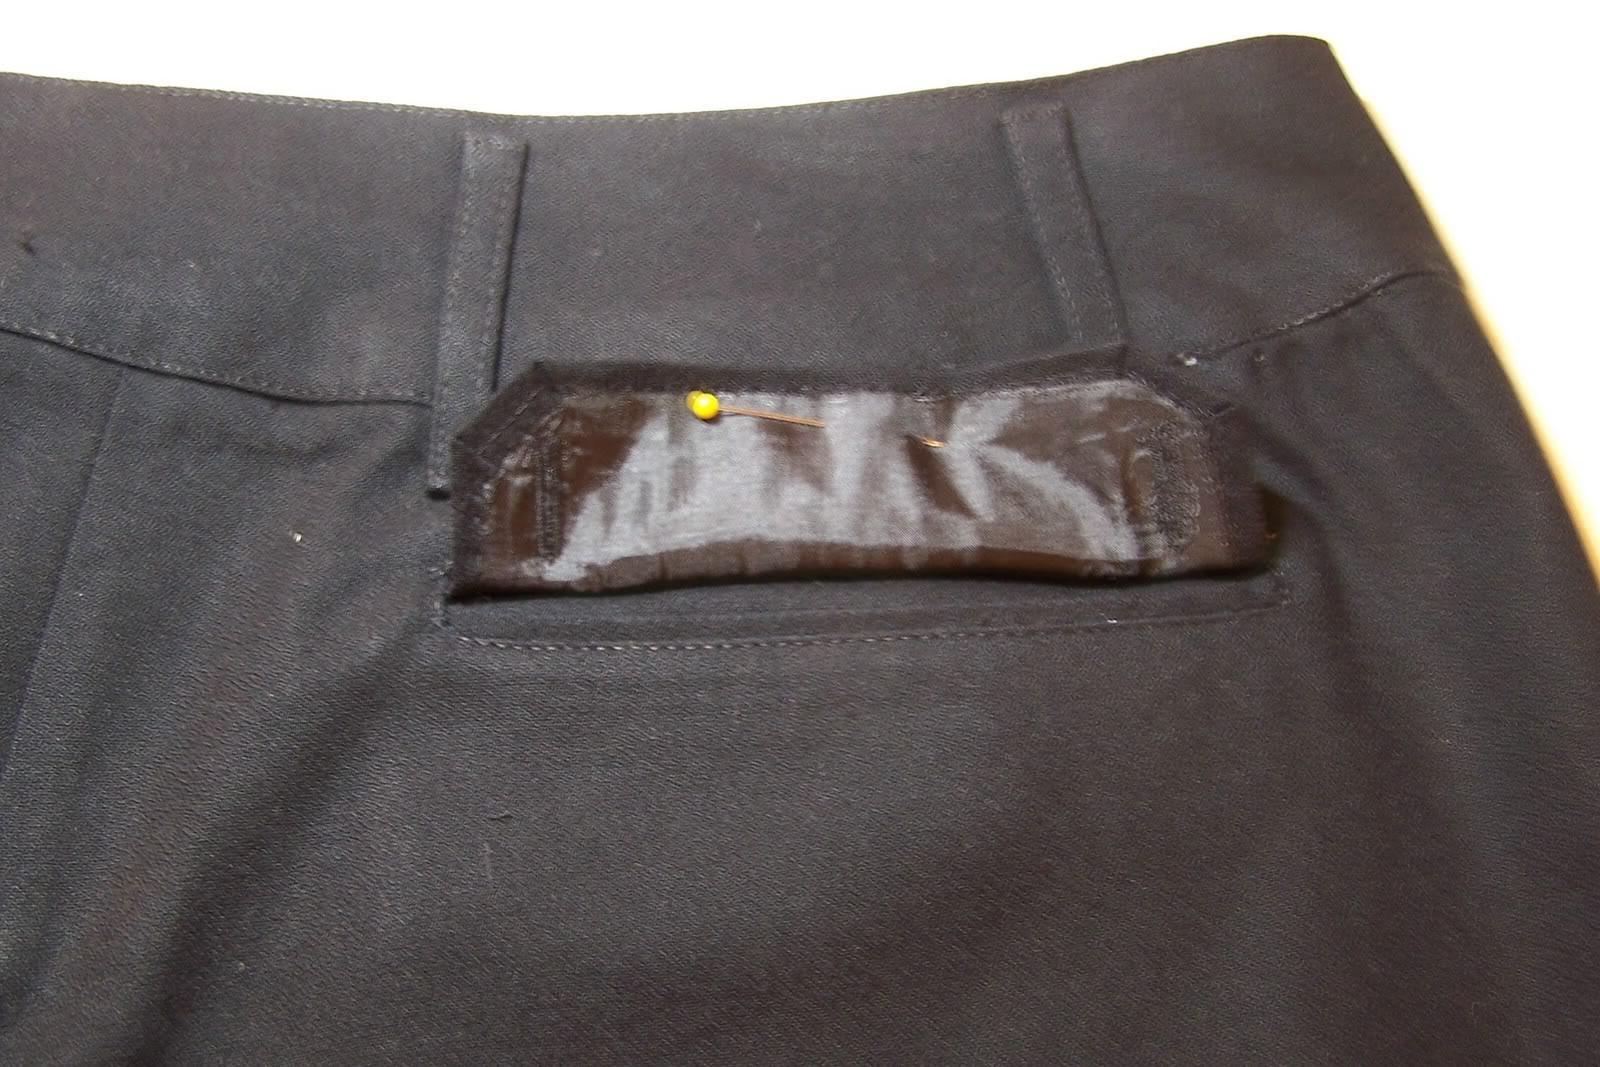 The pocket flap is inserted